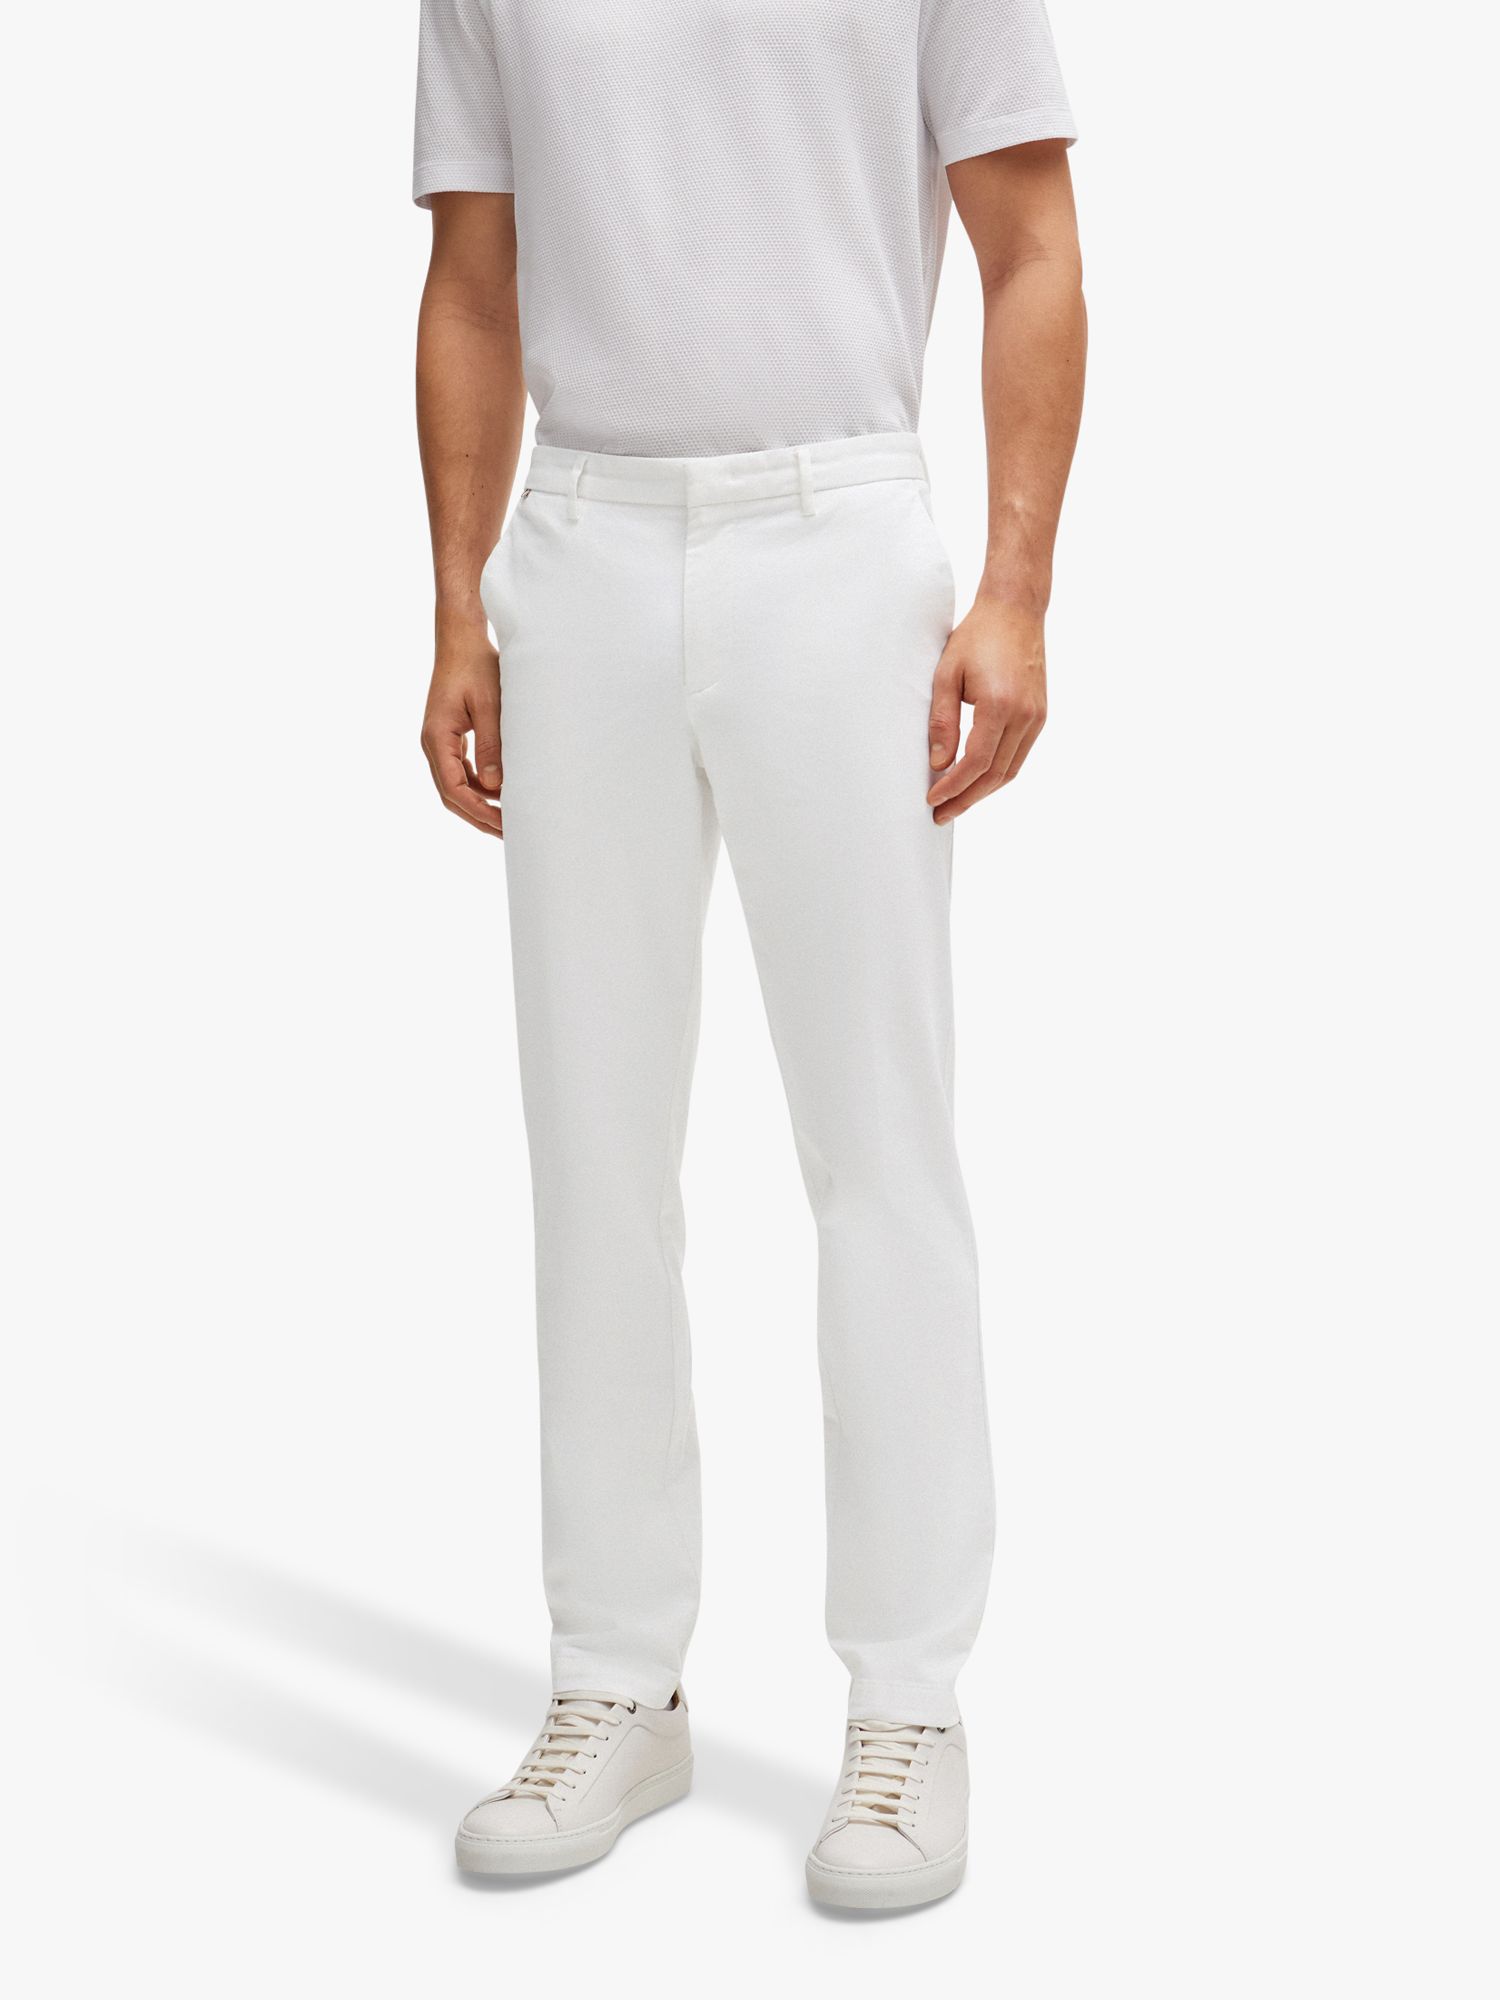 Buy BOSS Kaito Slim Fit Trousers Online at johnlewis.com